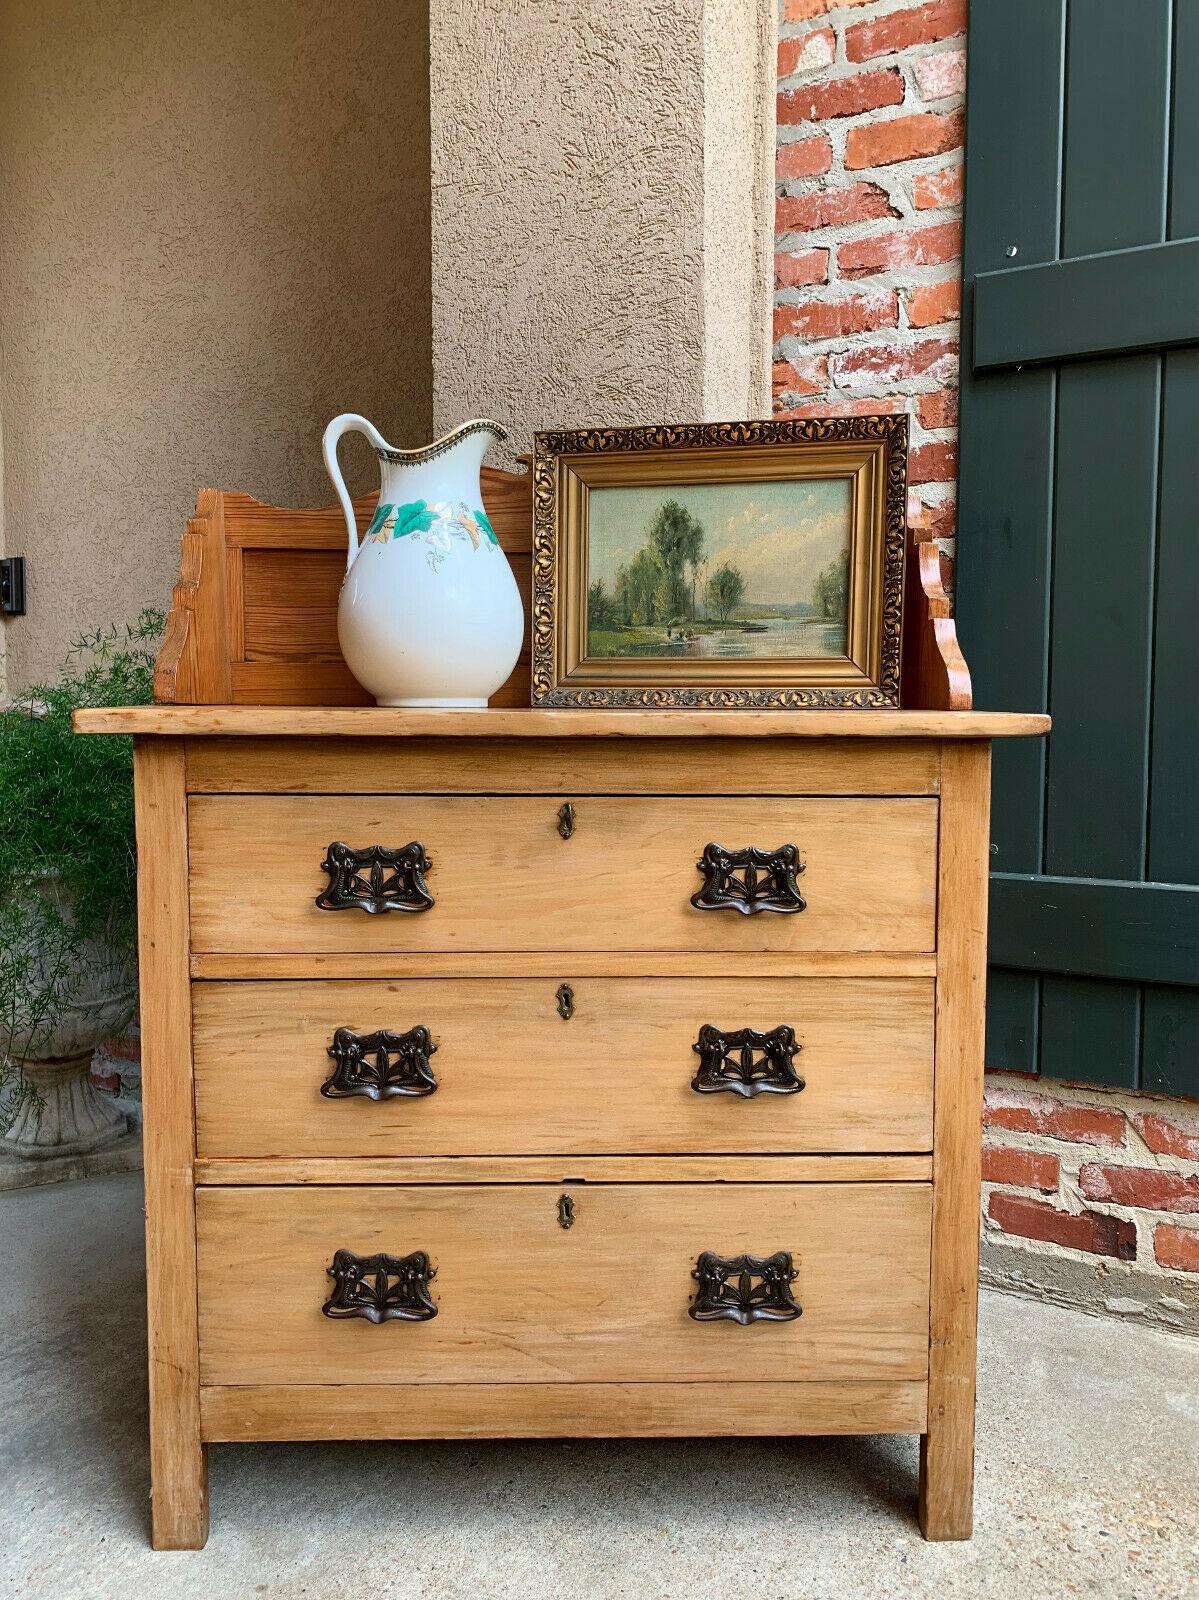 ~Direct from England~
~Lovely and versatile antique English PINE chest with BIG GORGEOUS DRAWER PULLS on all three of the large drawers!~
~Upper ‘backsplash’ can be used OR removed, it’s completely up to you!~
~THREE large, deep drawers for lots